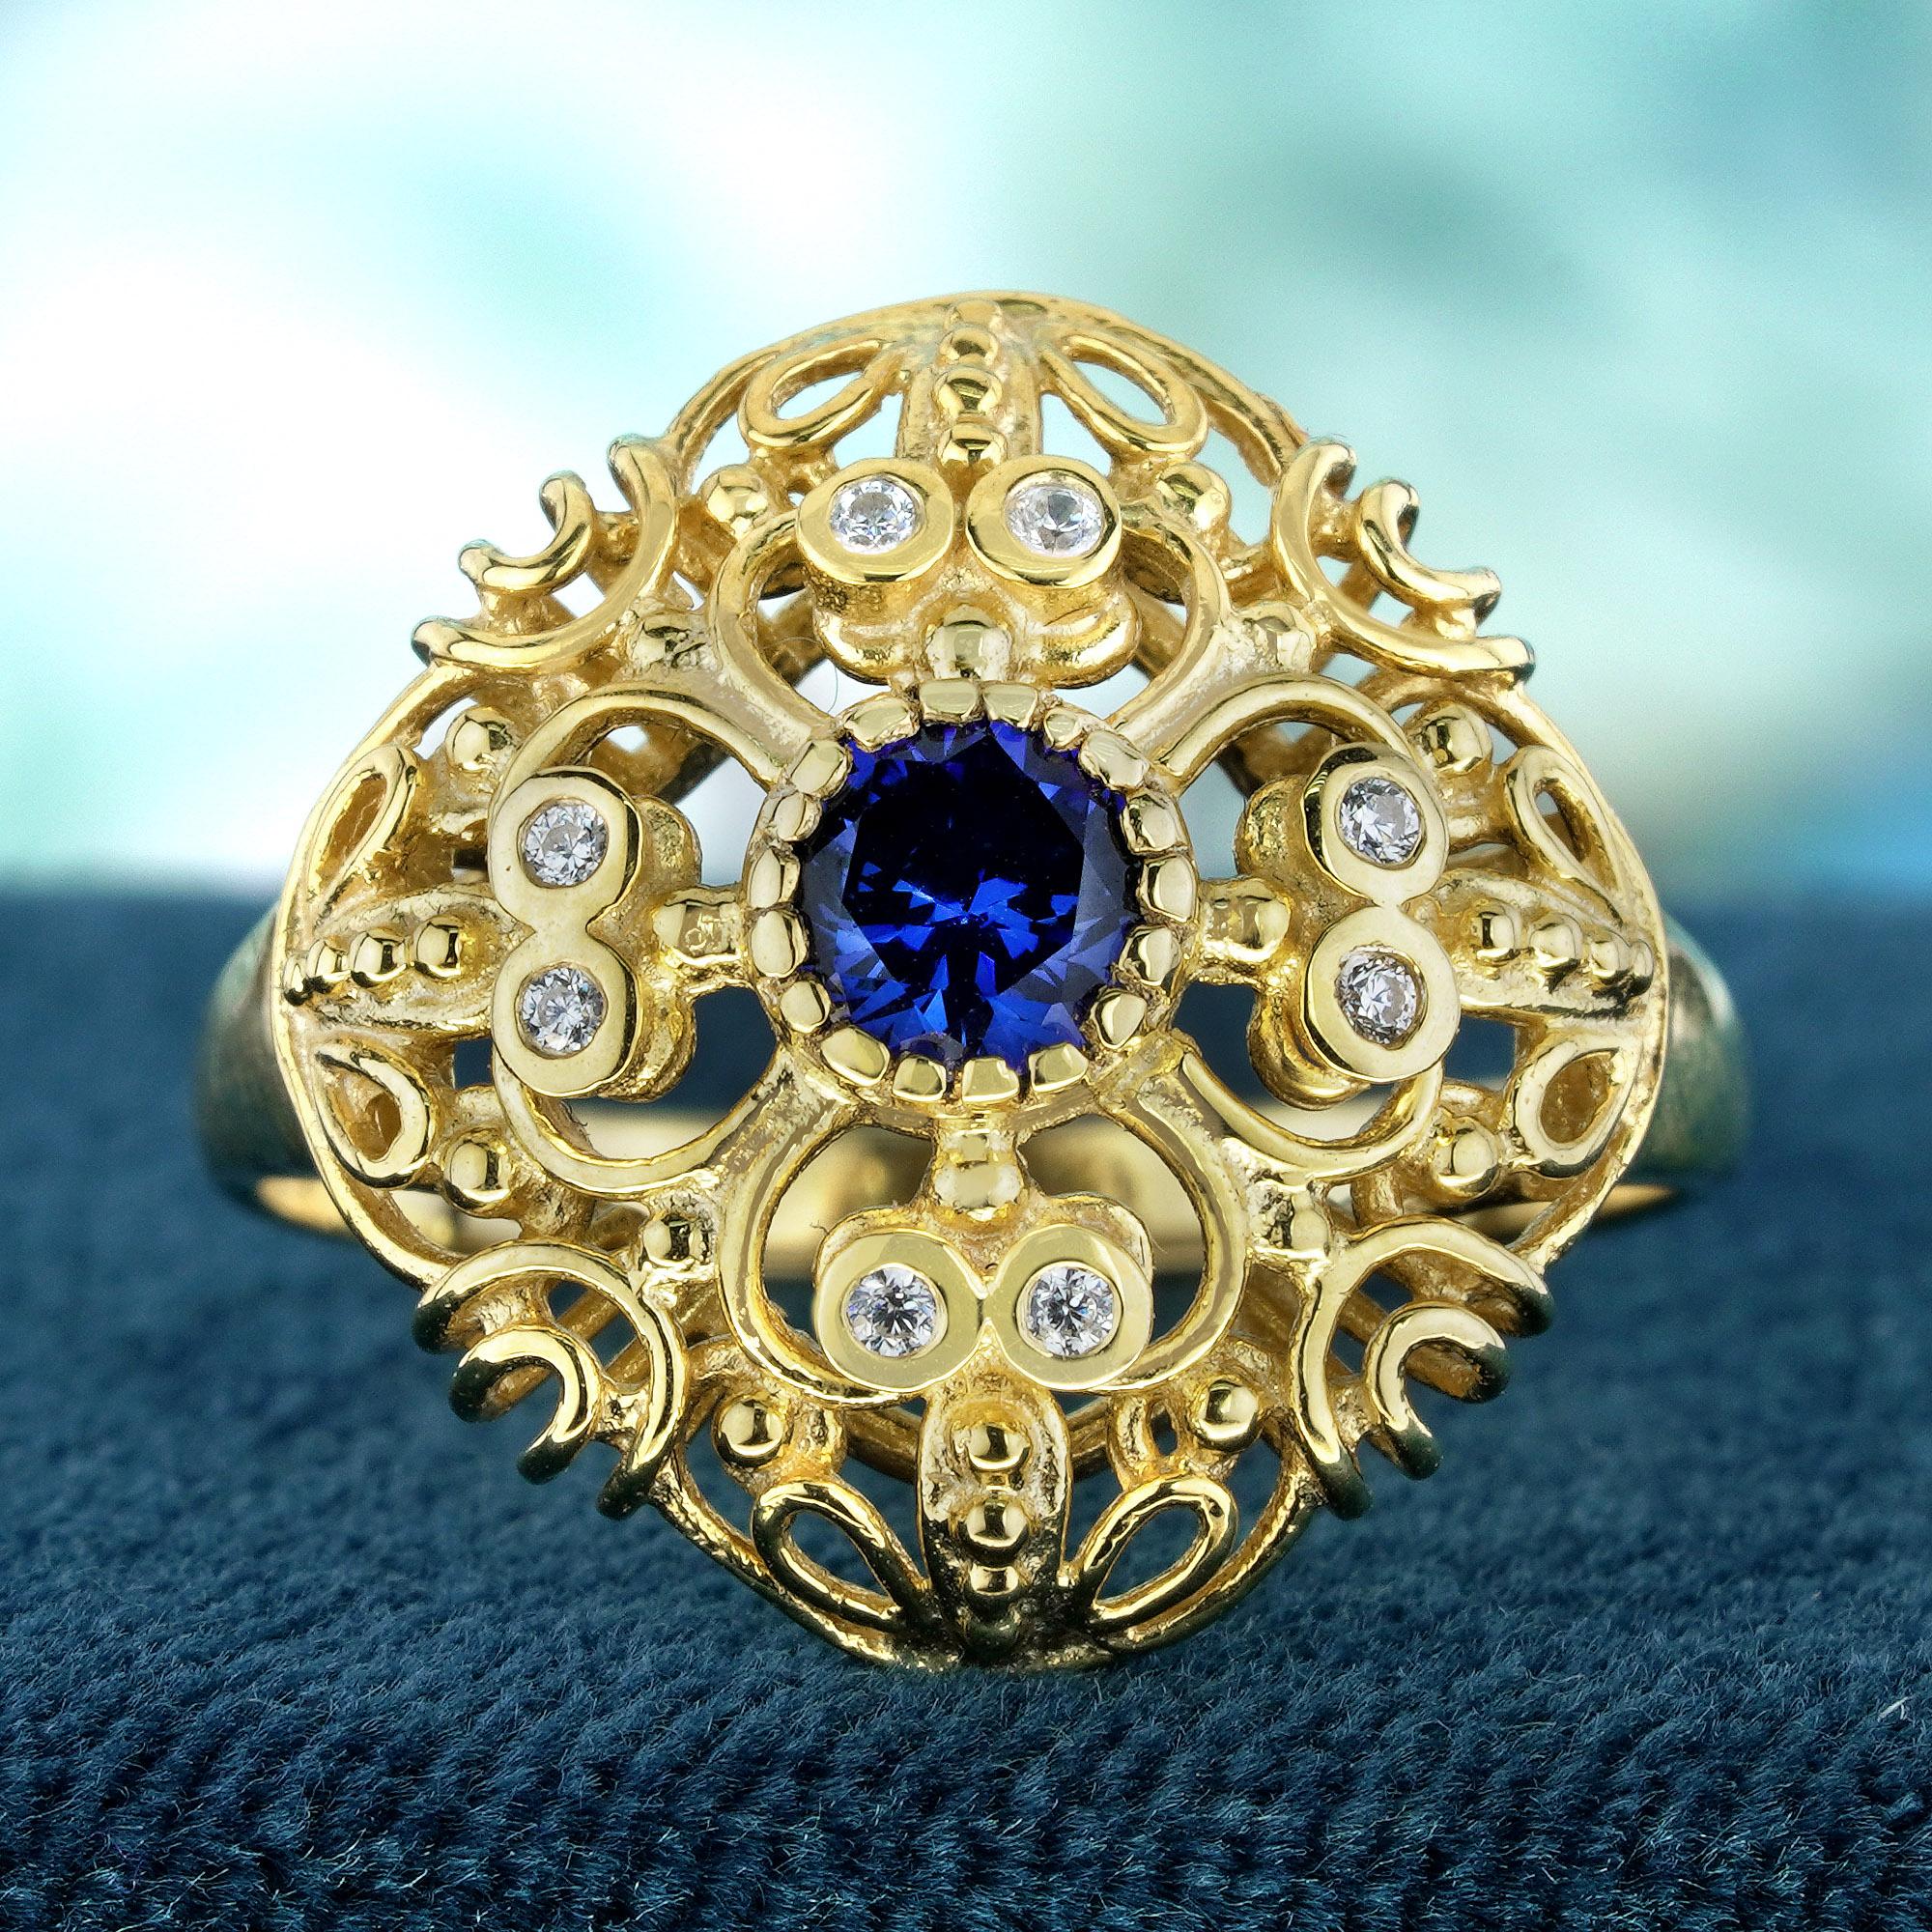 The central round blue sapphire of this vintage-inspired ring is accentuated by the stunning intricate filigree work and the brilliance of the embedded diamonds. The yellow gold band enhances the overall vintage aesthetic, making it a sophisticated